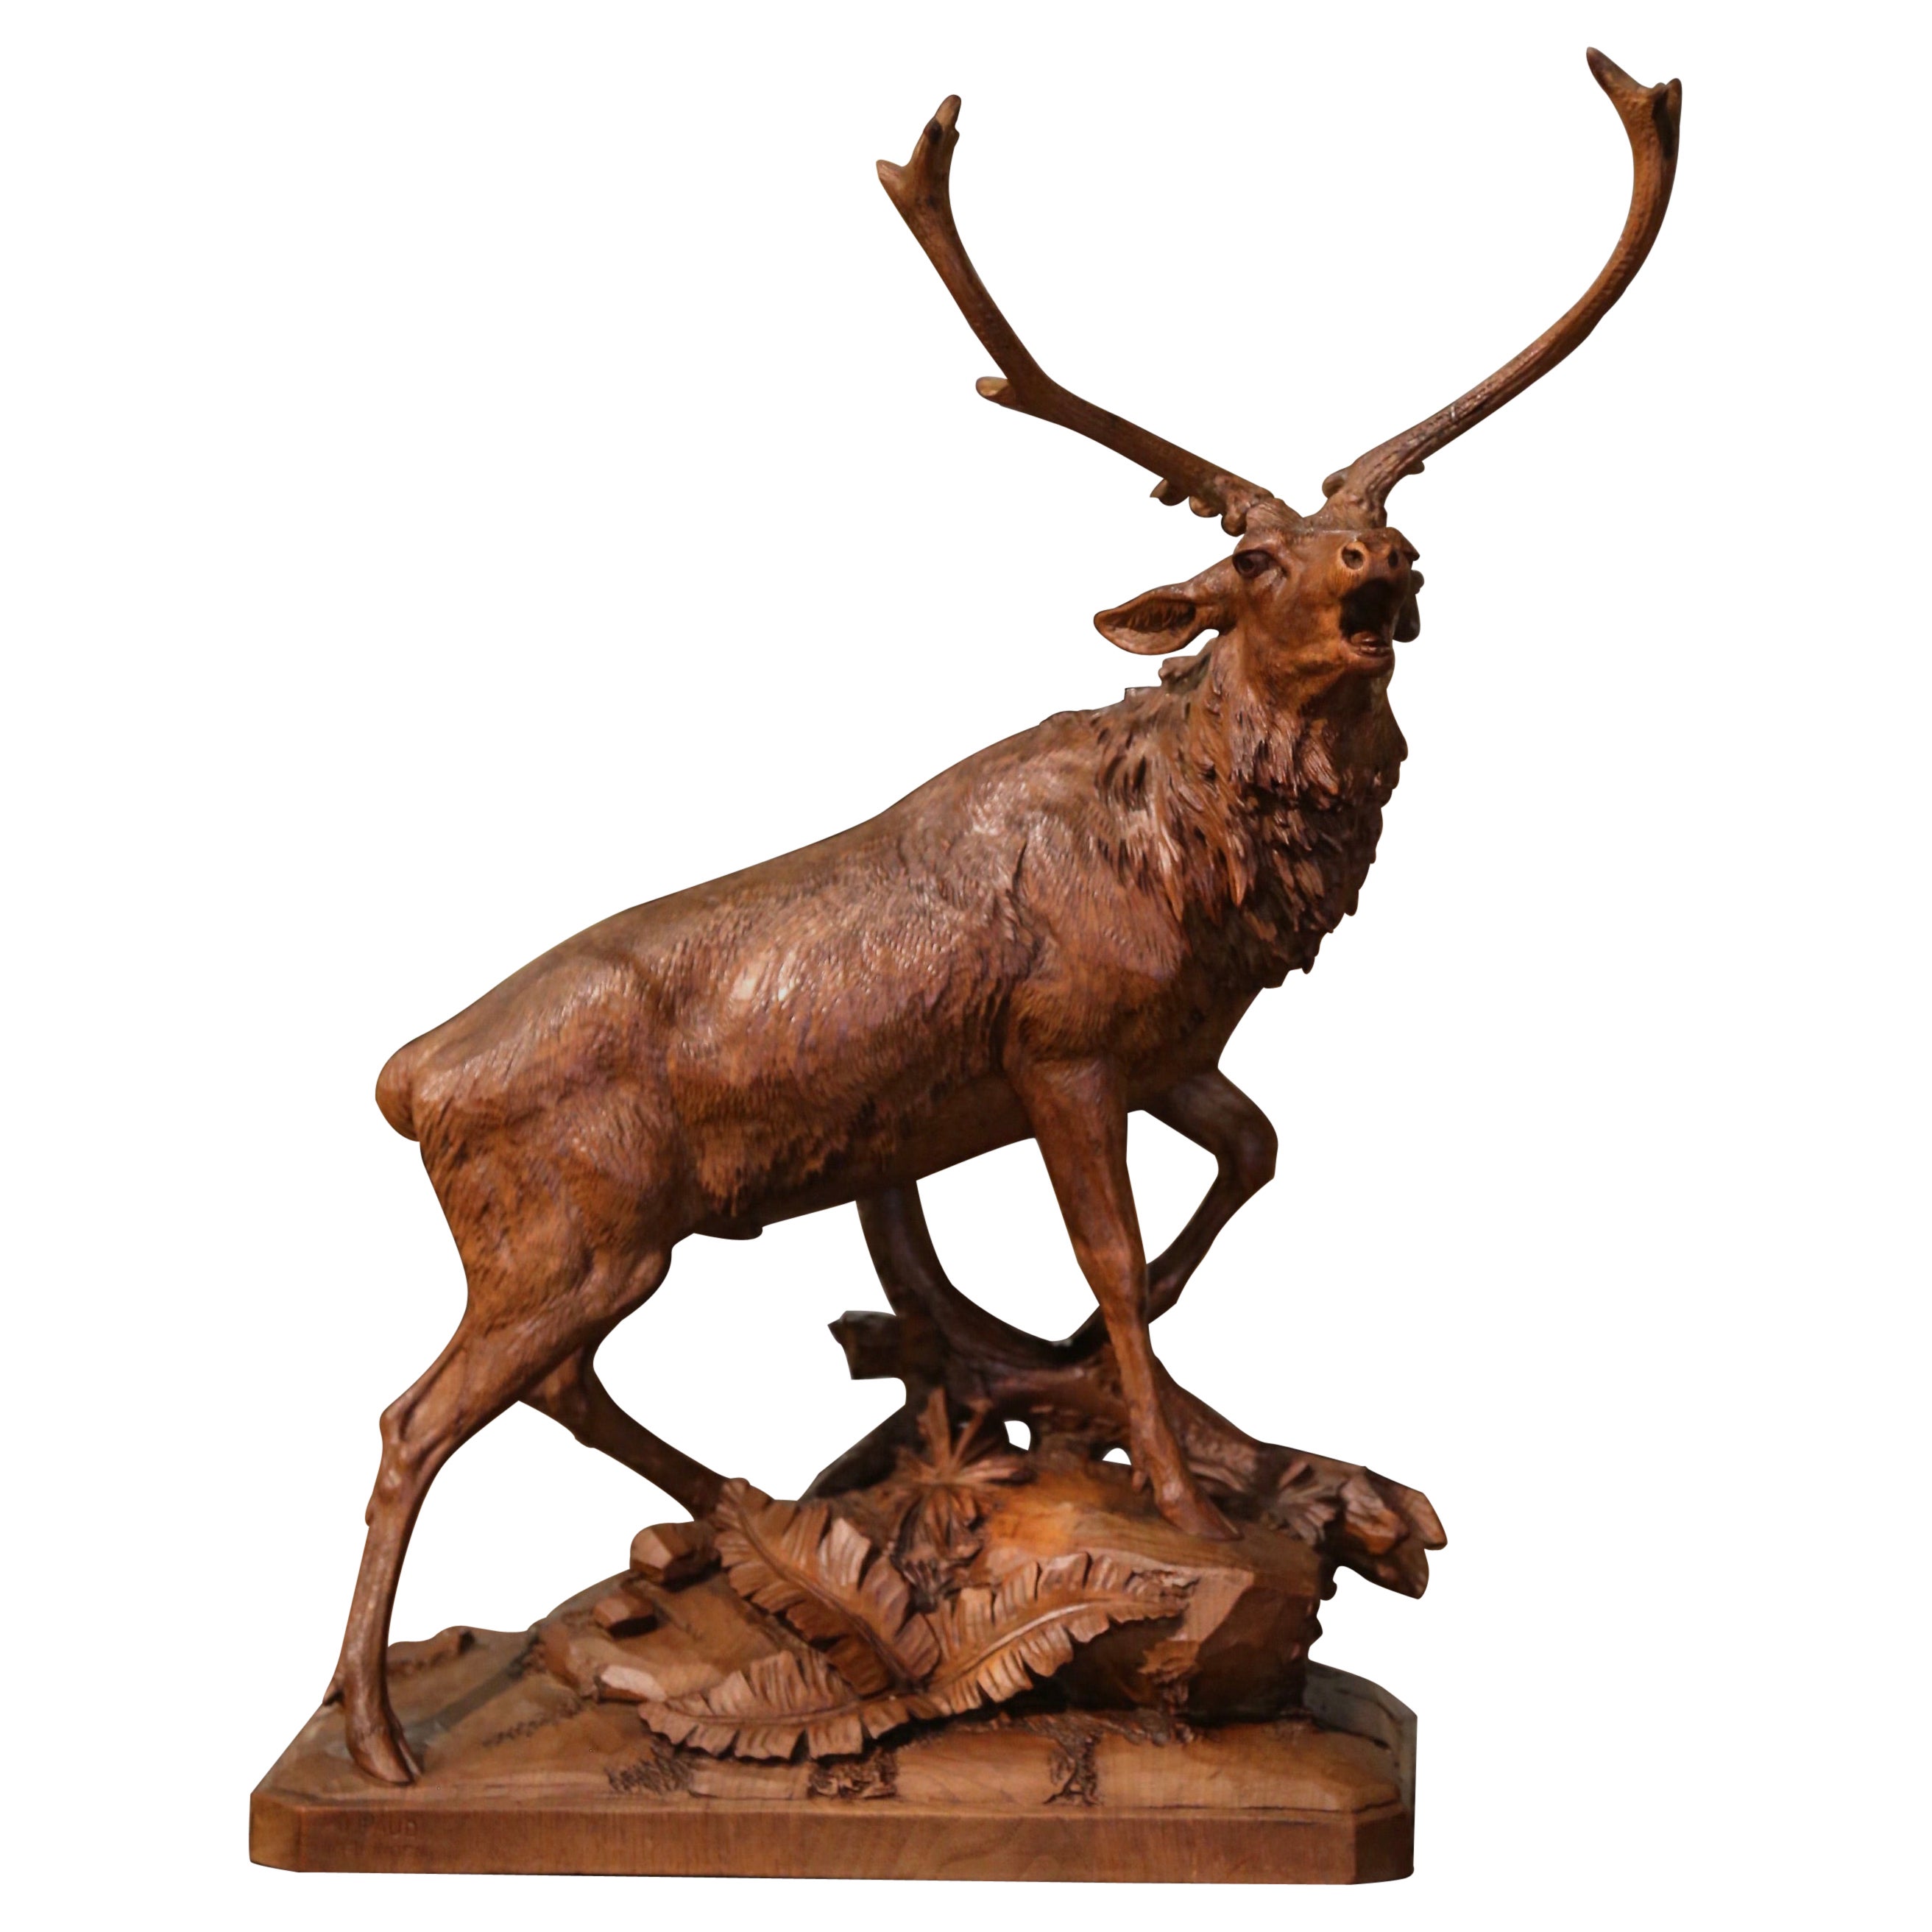 19th Century French Black Forest Carved Walnut Roaring Stag Sculpture